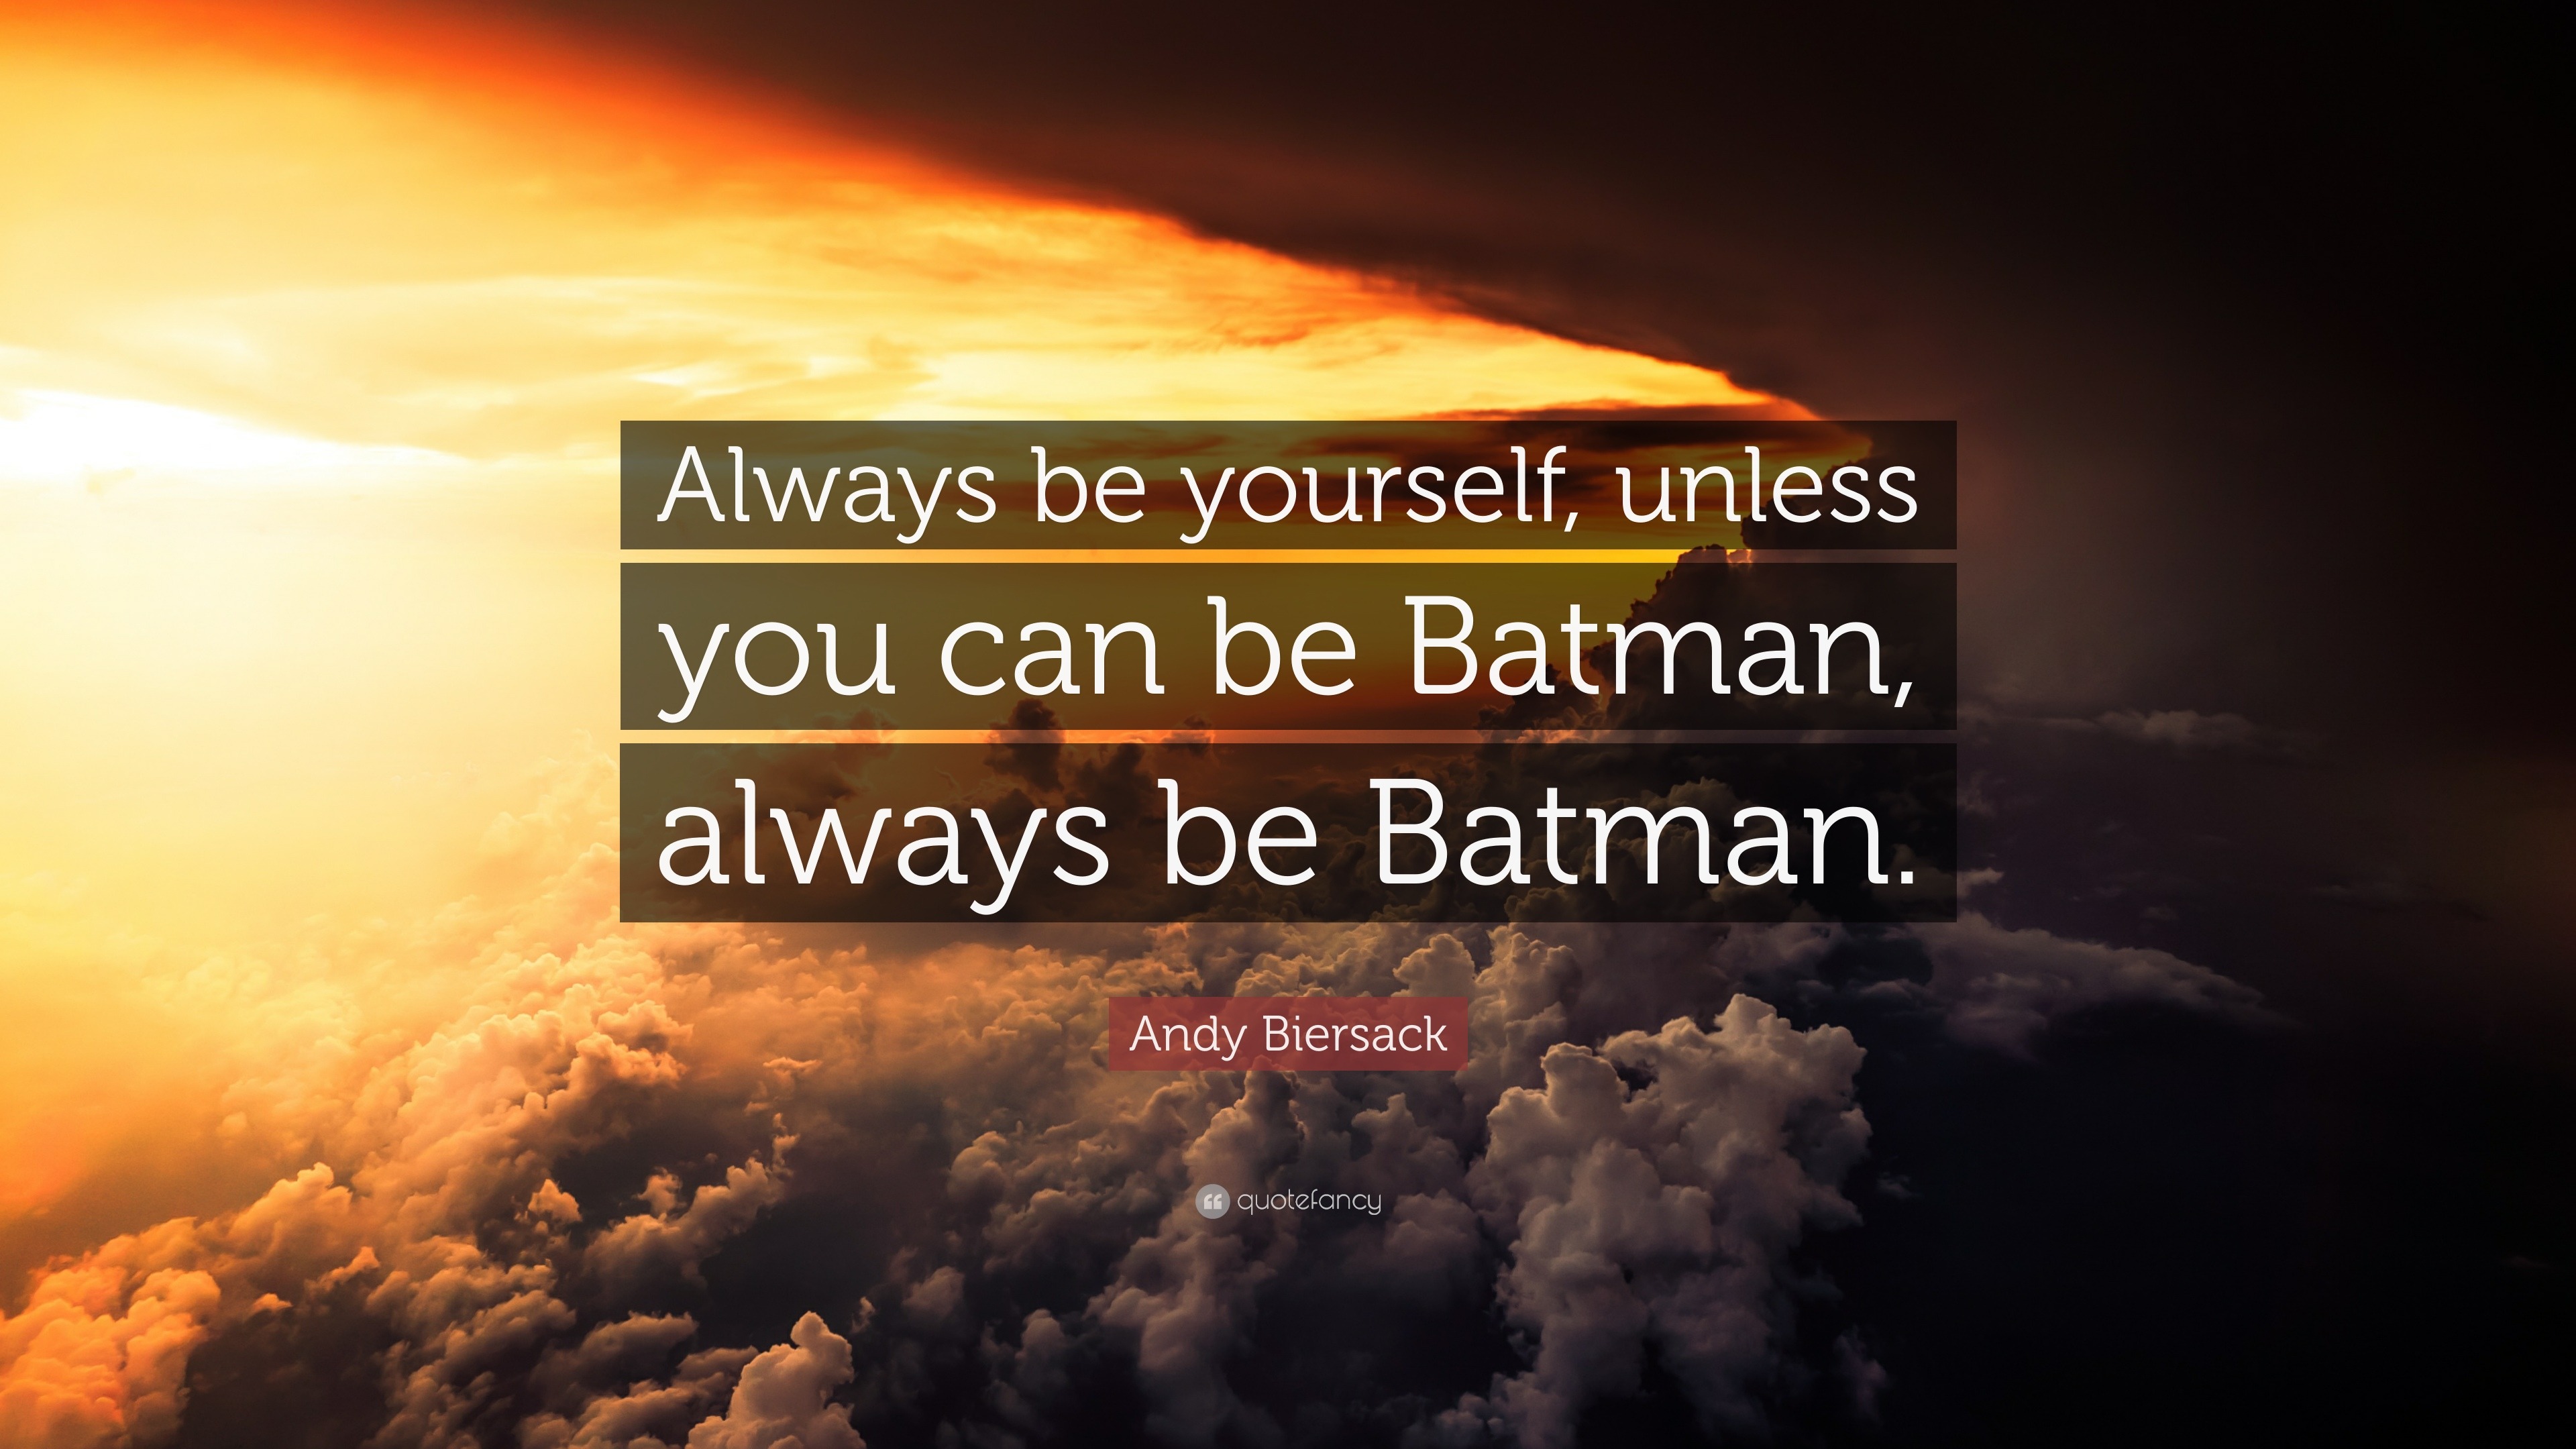 Andy Biersack Quote: "Always be yourself, unless you can ...